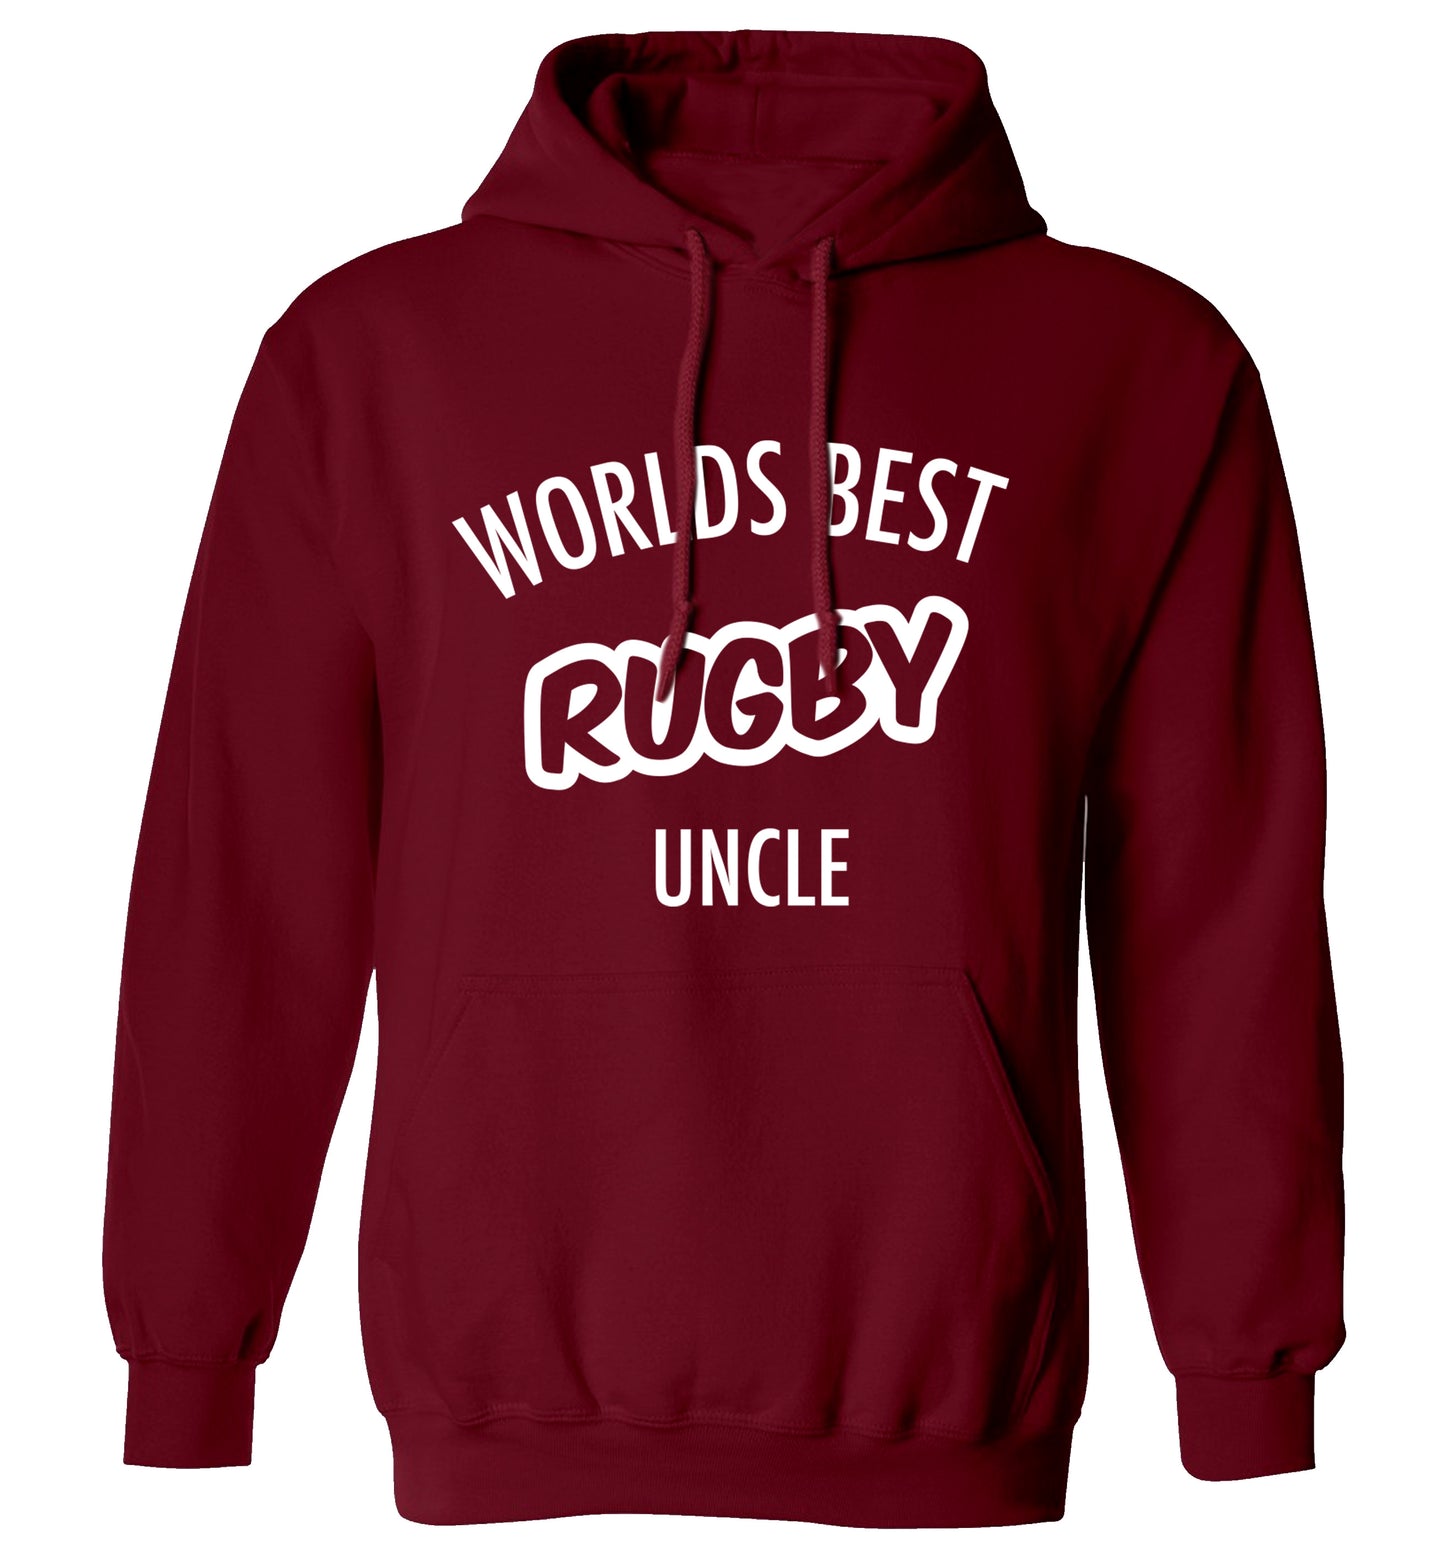 Worlds best rugby uncle adults unisex maroon hoodie 2XL